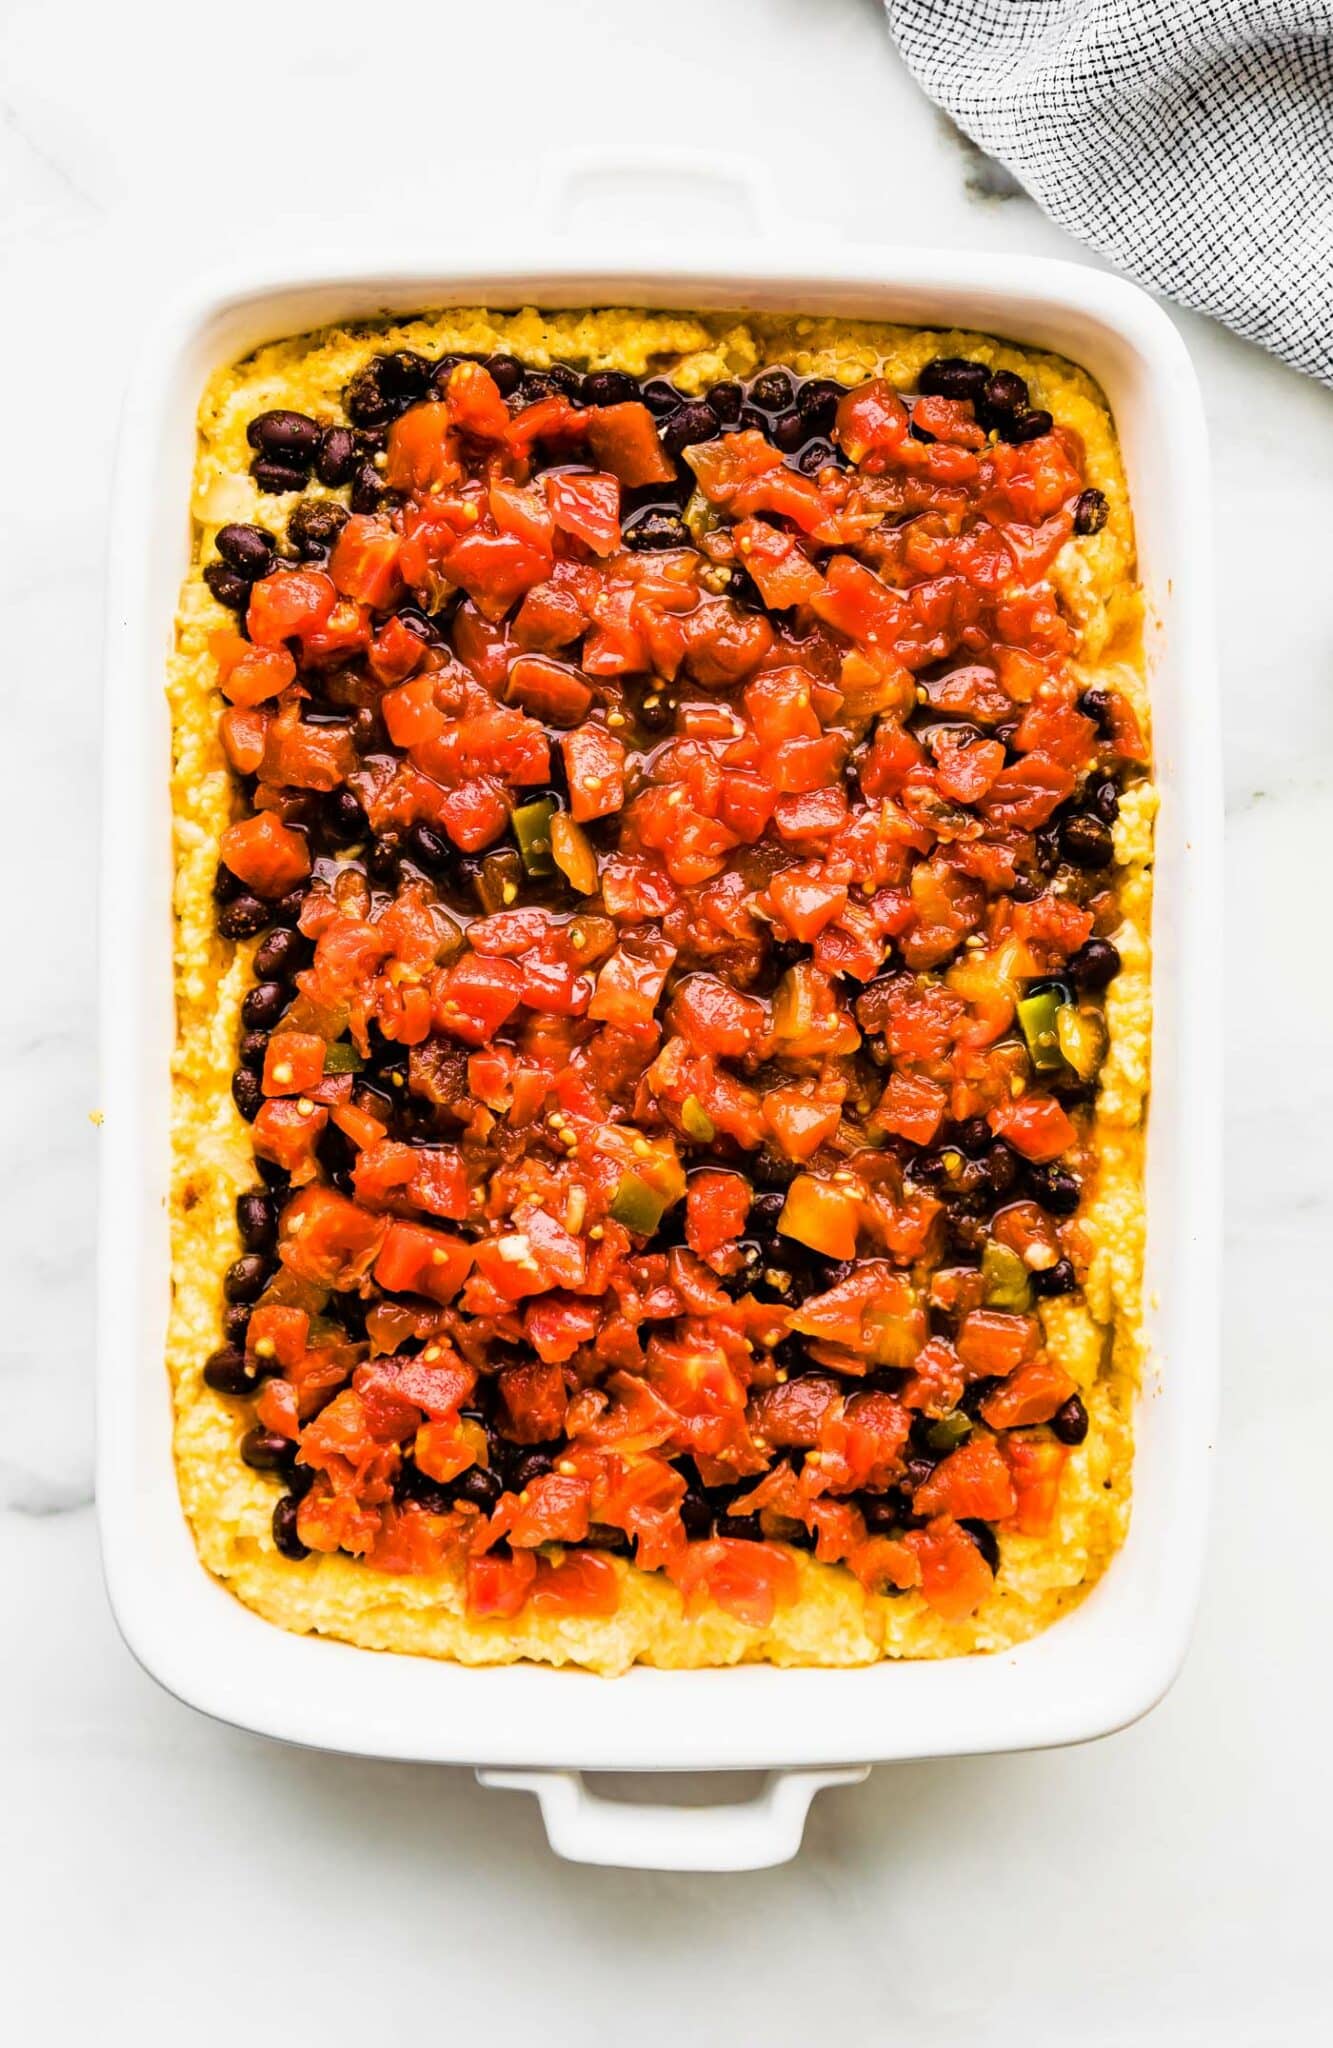 polenta, black beans, and tomatoes in a casserole dish